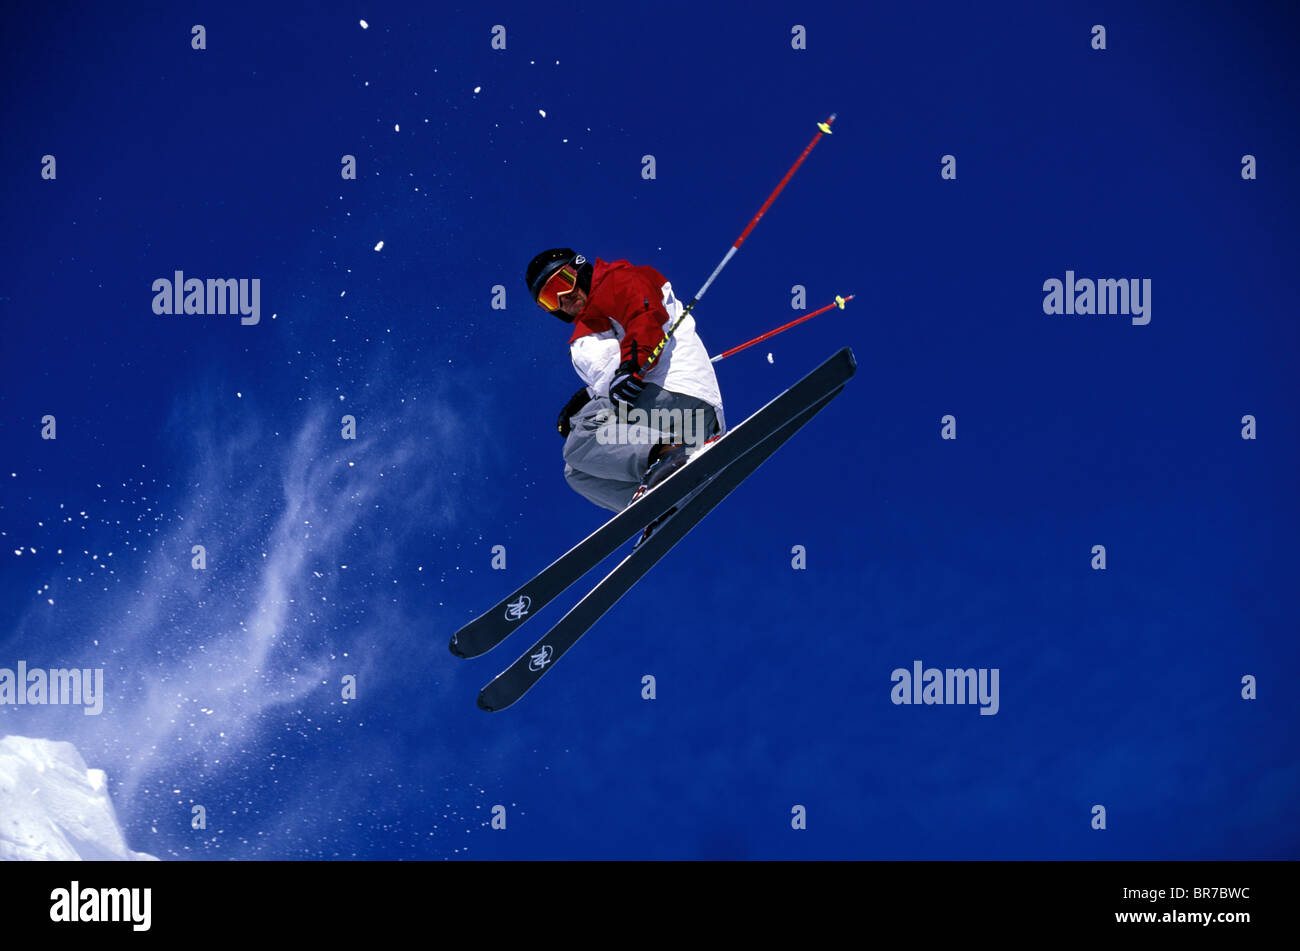 Male freeskier launching into the air backwards in Lake Tahoe California. Stock Photo